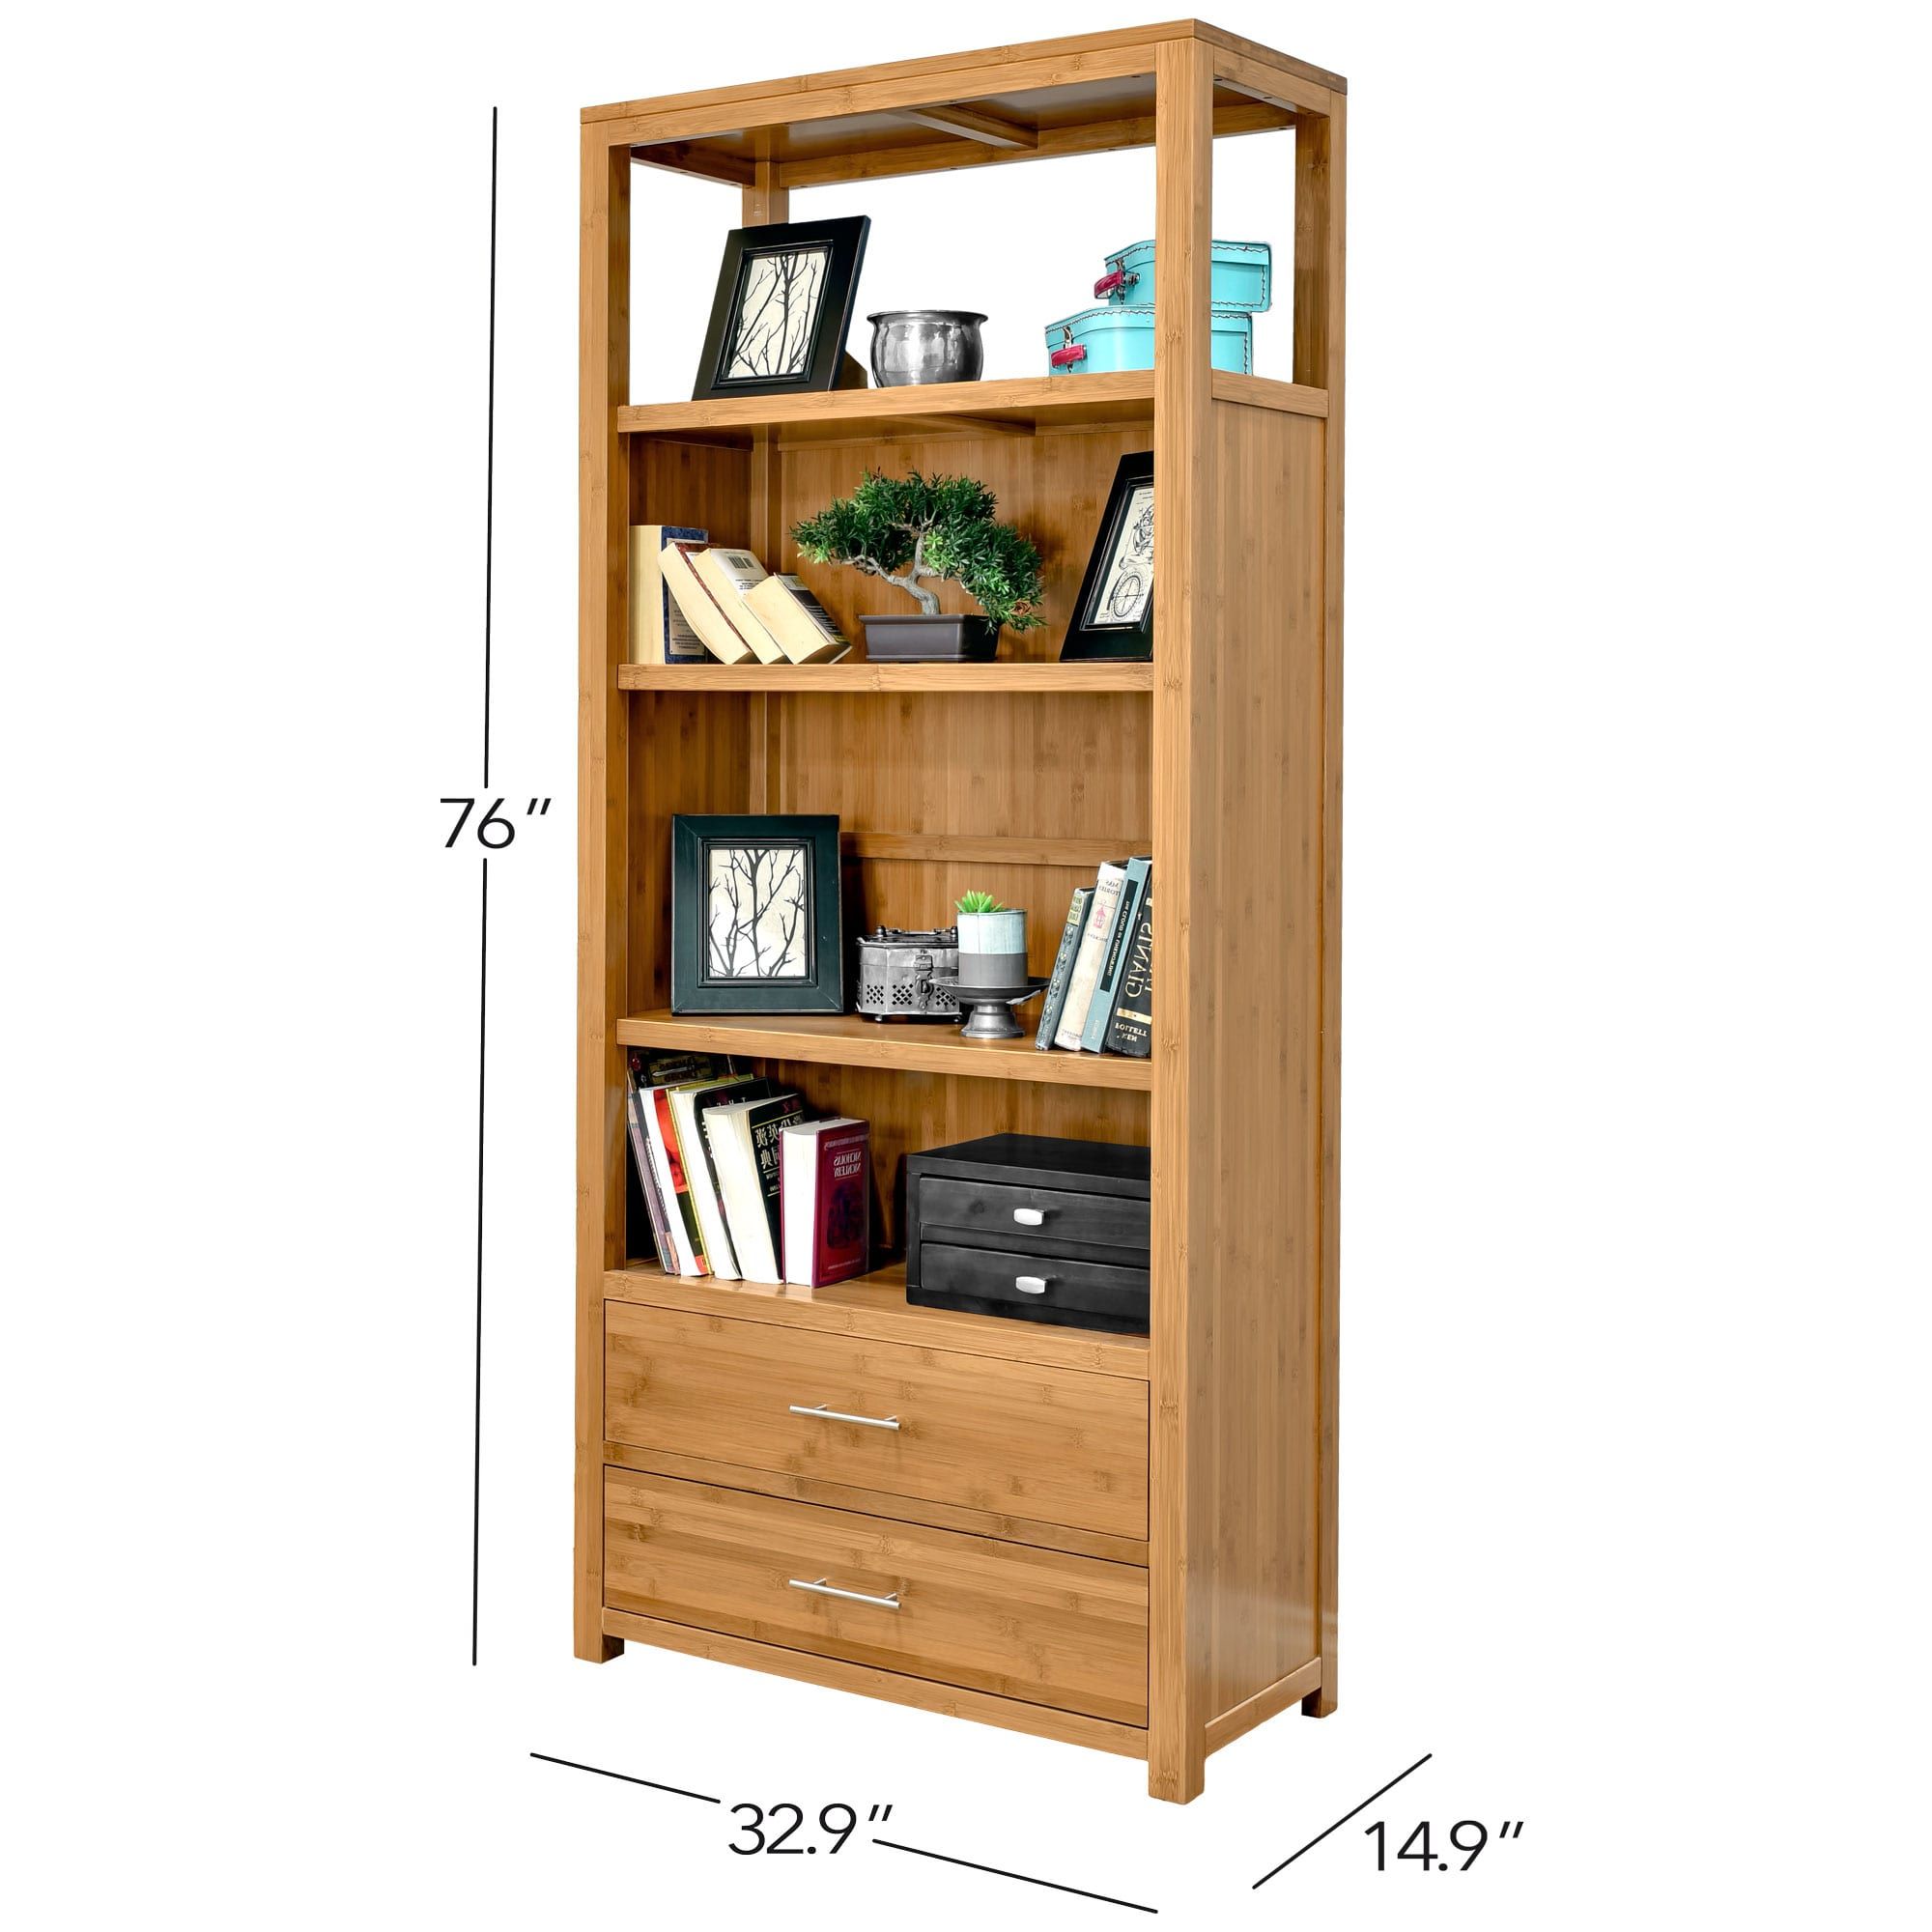 Niko 76" Bamboo Bookcase | Epoch Design Inside Bamboo Bookcases (View 14 of 15)